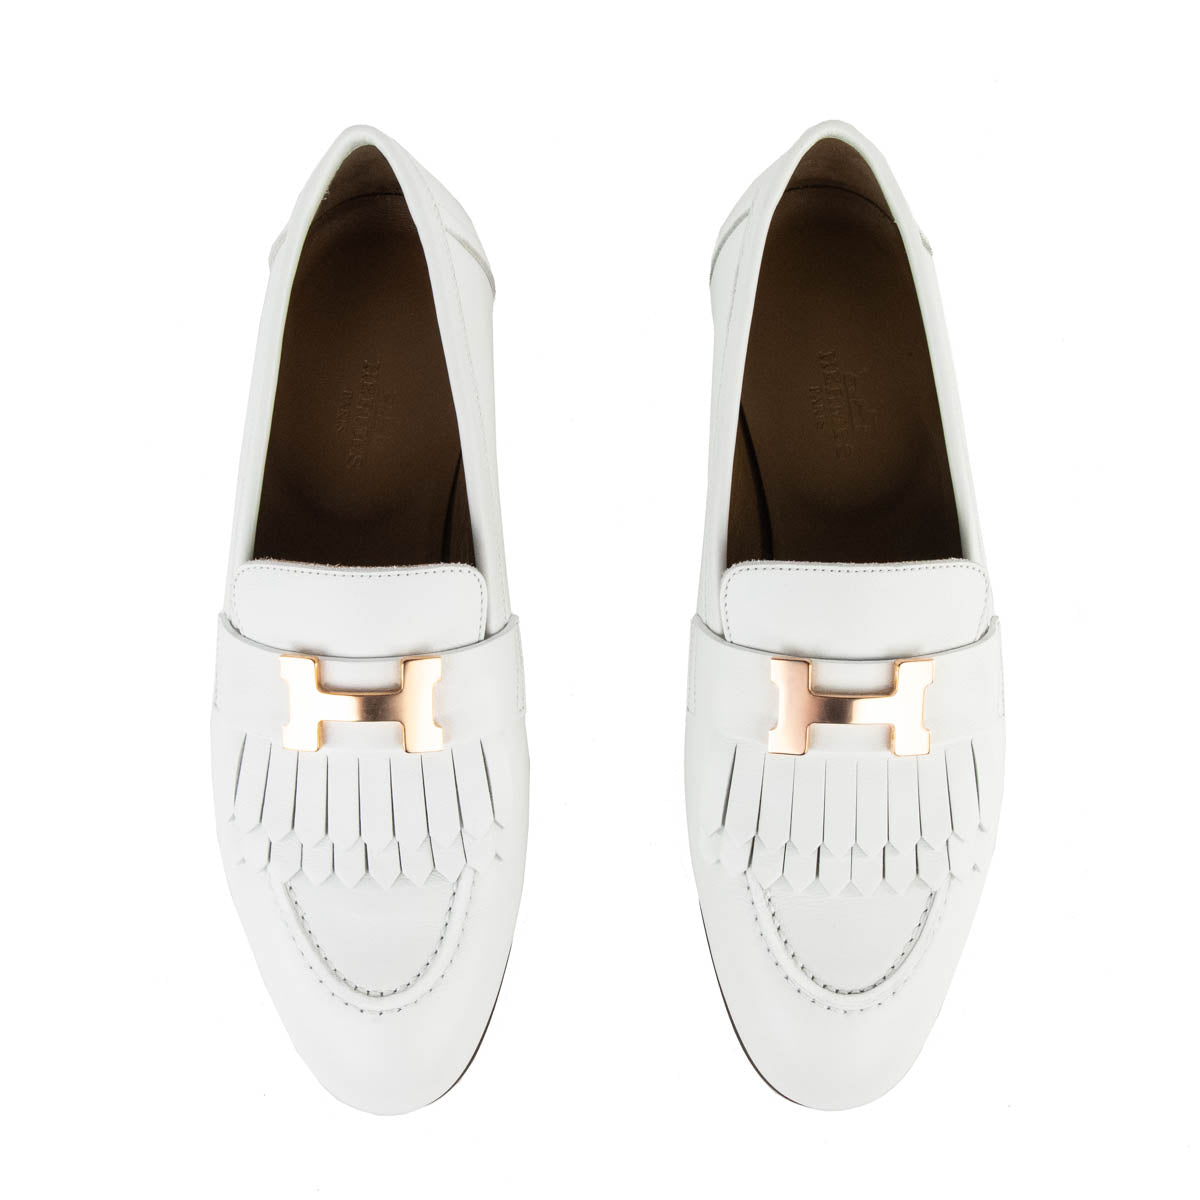 Hermes White Calfskin Mocassins Royal Loafers Size US 6 | EU 36 - Love that Bag etc - Preowned Authentic Designer Handbags & Preloved Fashions